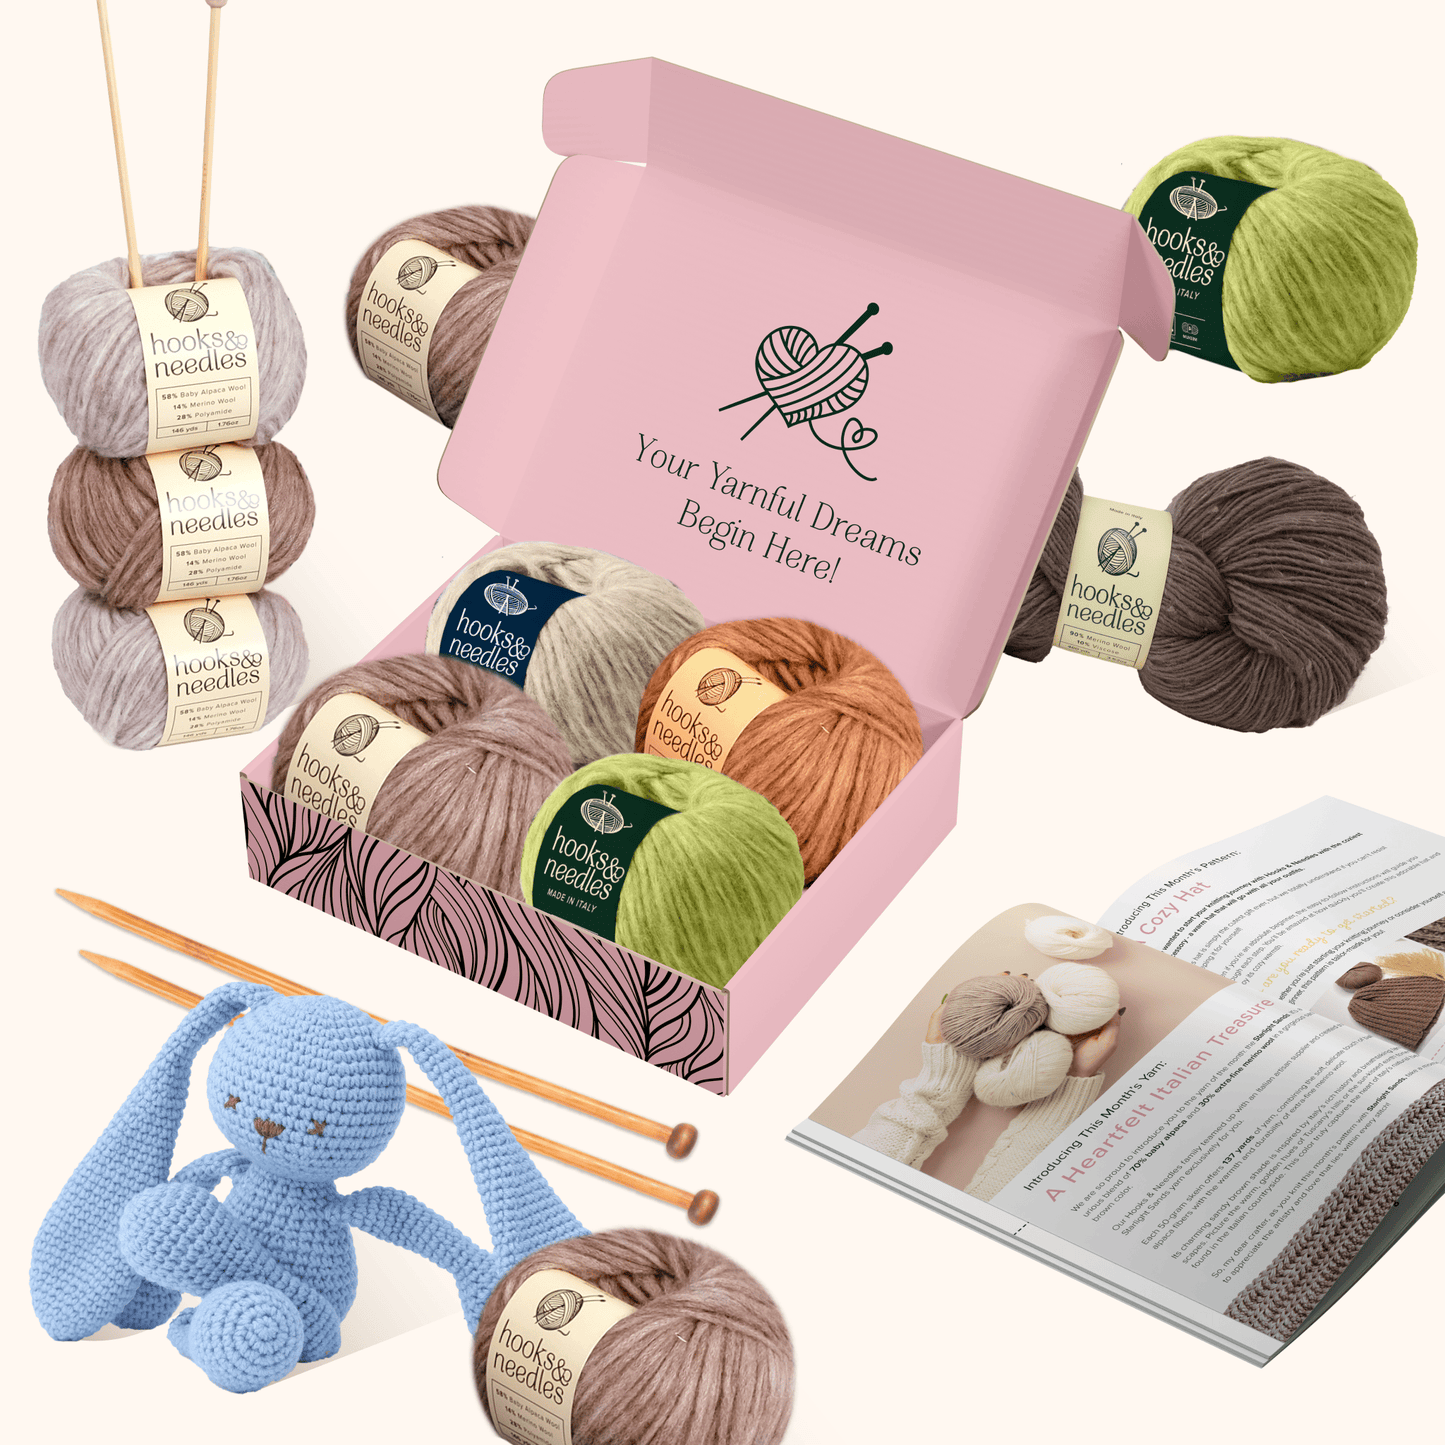 A [6-Month-Prepaid] Hooks & Needles Subscription Box #26 featuring yarn balls, knitting needles, a pattern book, and a completed blue crochet bunny, displayed with a branding box.